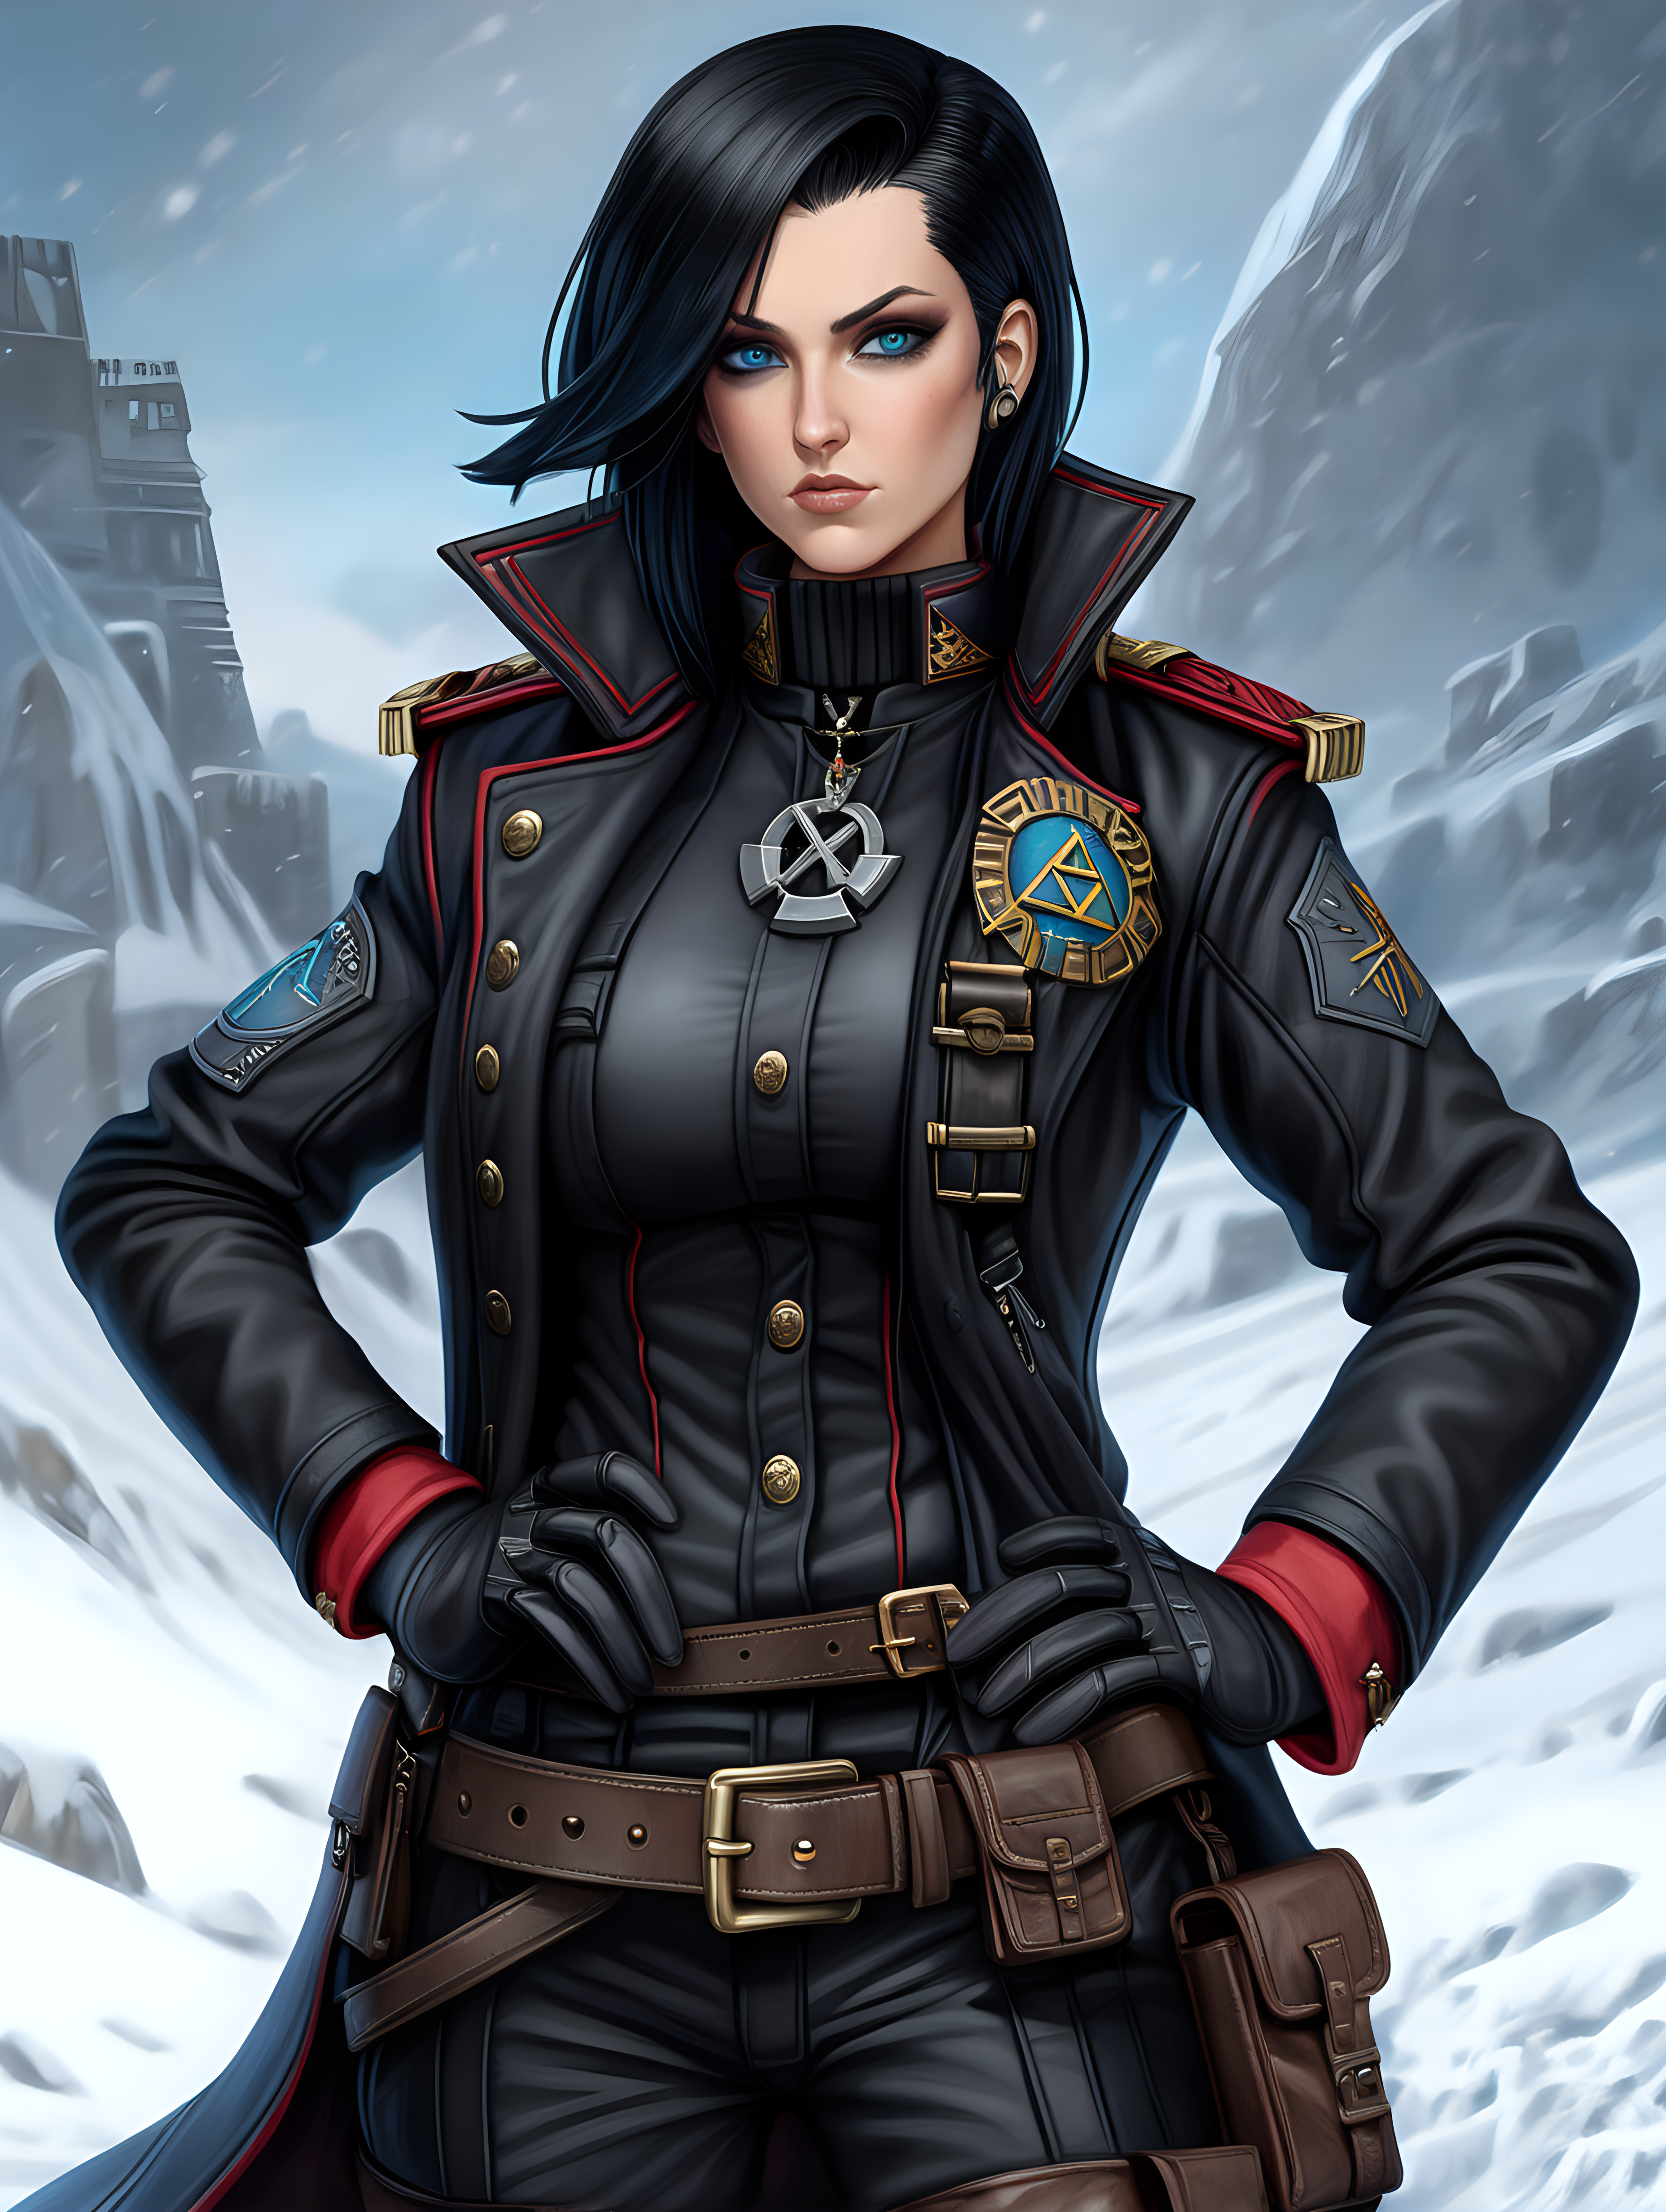 Warhammer 40K young very busty Commissar woman. She has an hourglass shape. She has raven black hair. She has a very short hair style similar to what Maya, from Borderlands 2, has. Dark black uniform. Dark brown belt has a lot of pouches, grenades, and a black holster attached. Dark brown bandolier around waist. Her dark black uniform jacket fits perfectly and is closed up. She has a lot of eye shadow. Background scene is snowy trench line. She has icy blue eyes. Her uniform has some Norse runes. She is wearing warm clothes. Valknut rune is on collar of jacket.